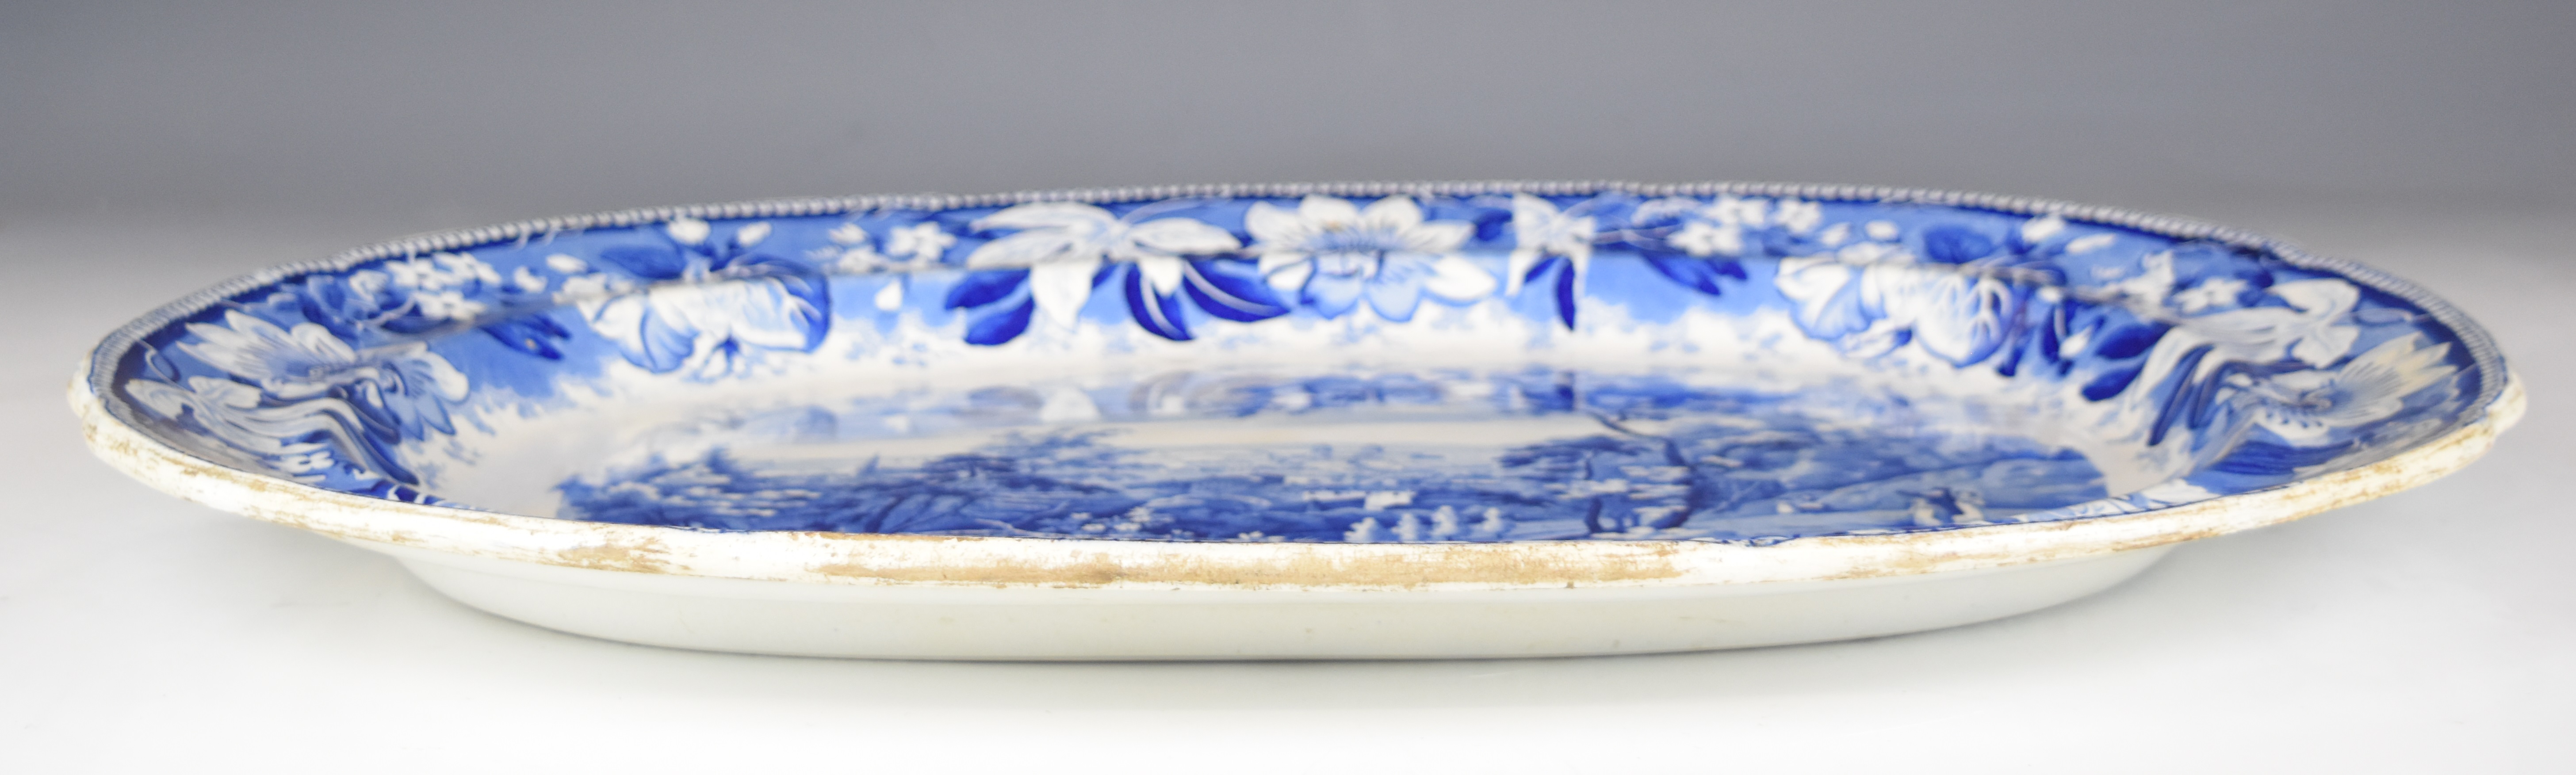 19thC blue and white transfer printed meat platter 'Metropolitan Scenery, view of Greenwich', 45 x - Image 2 of 6